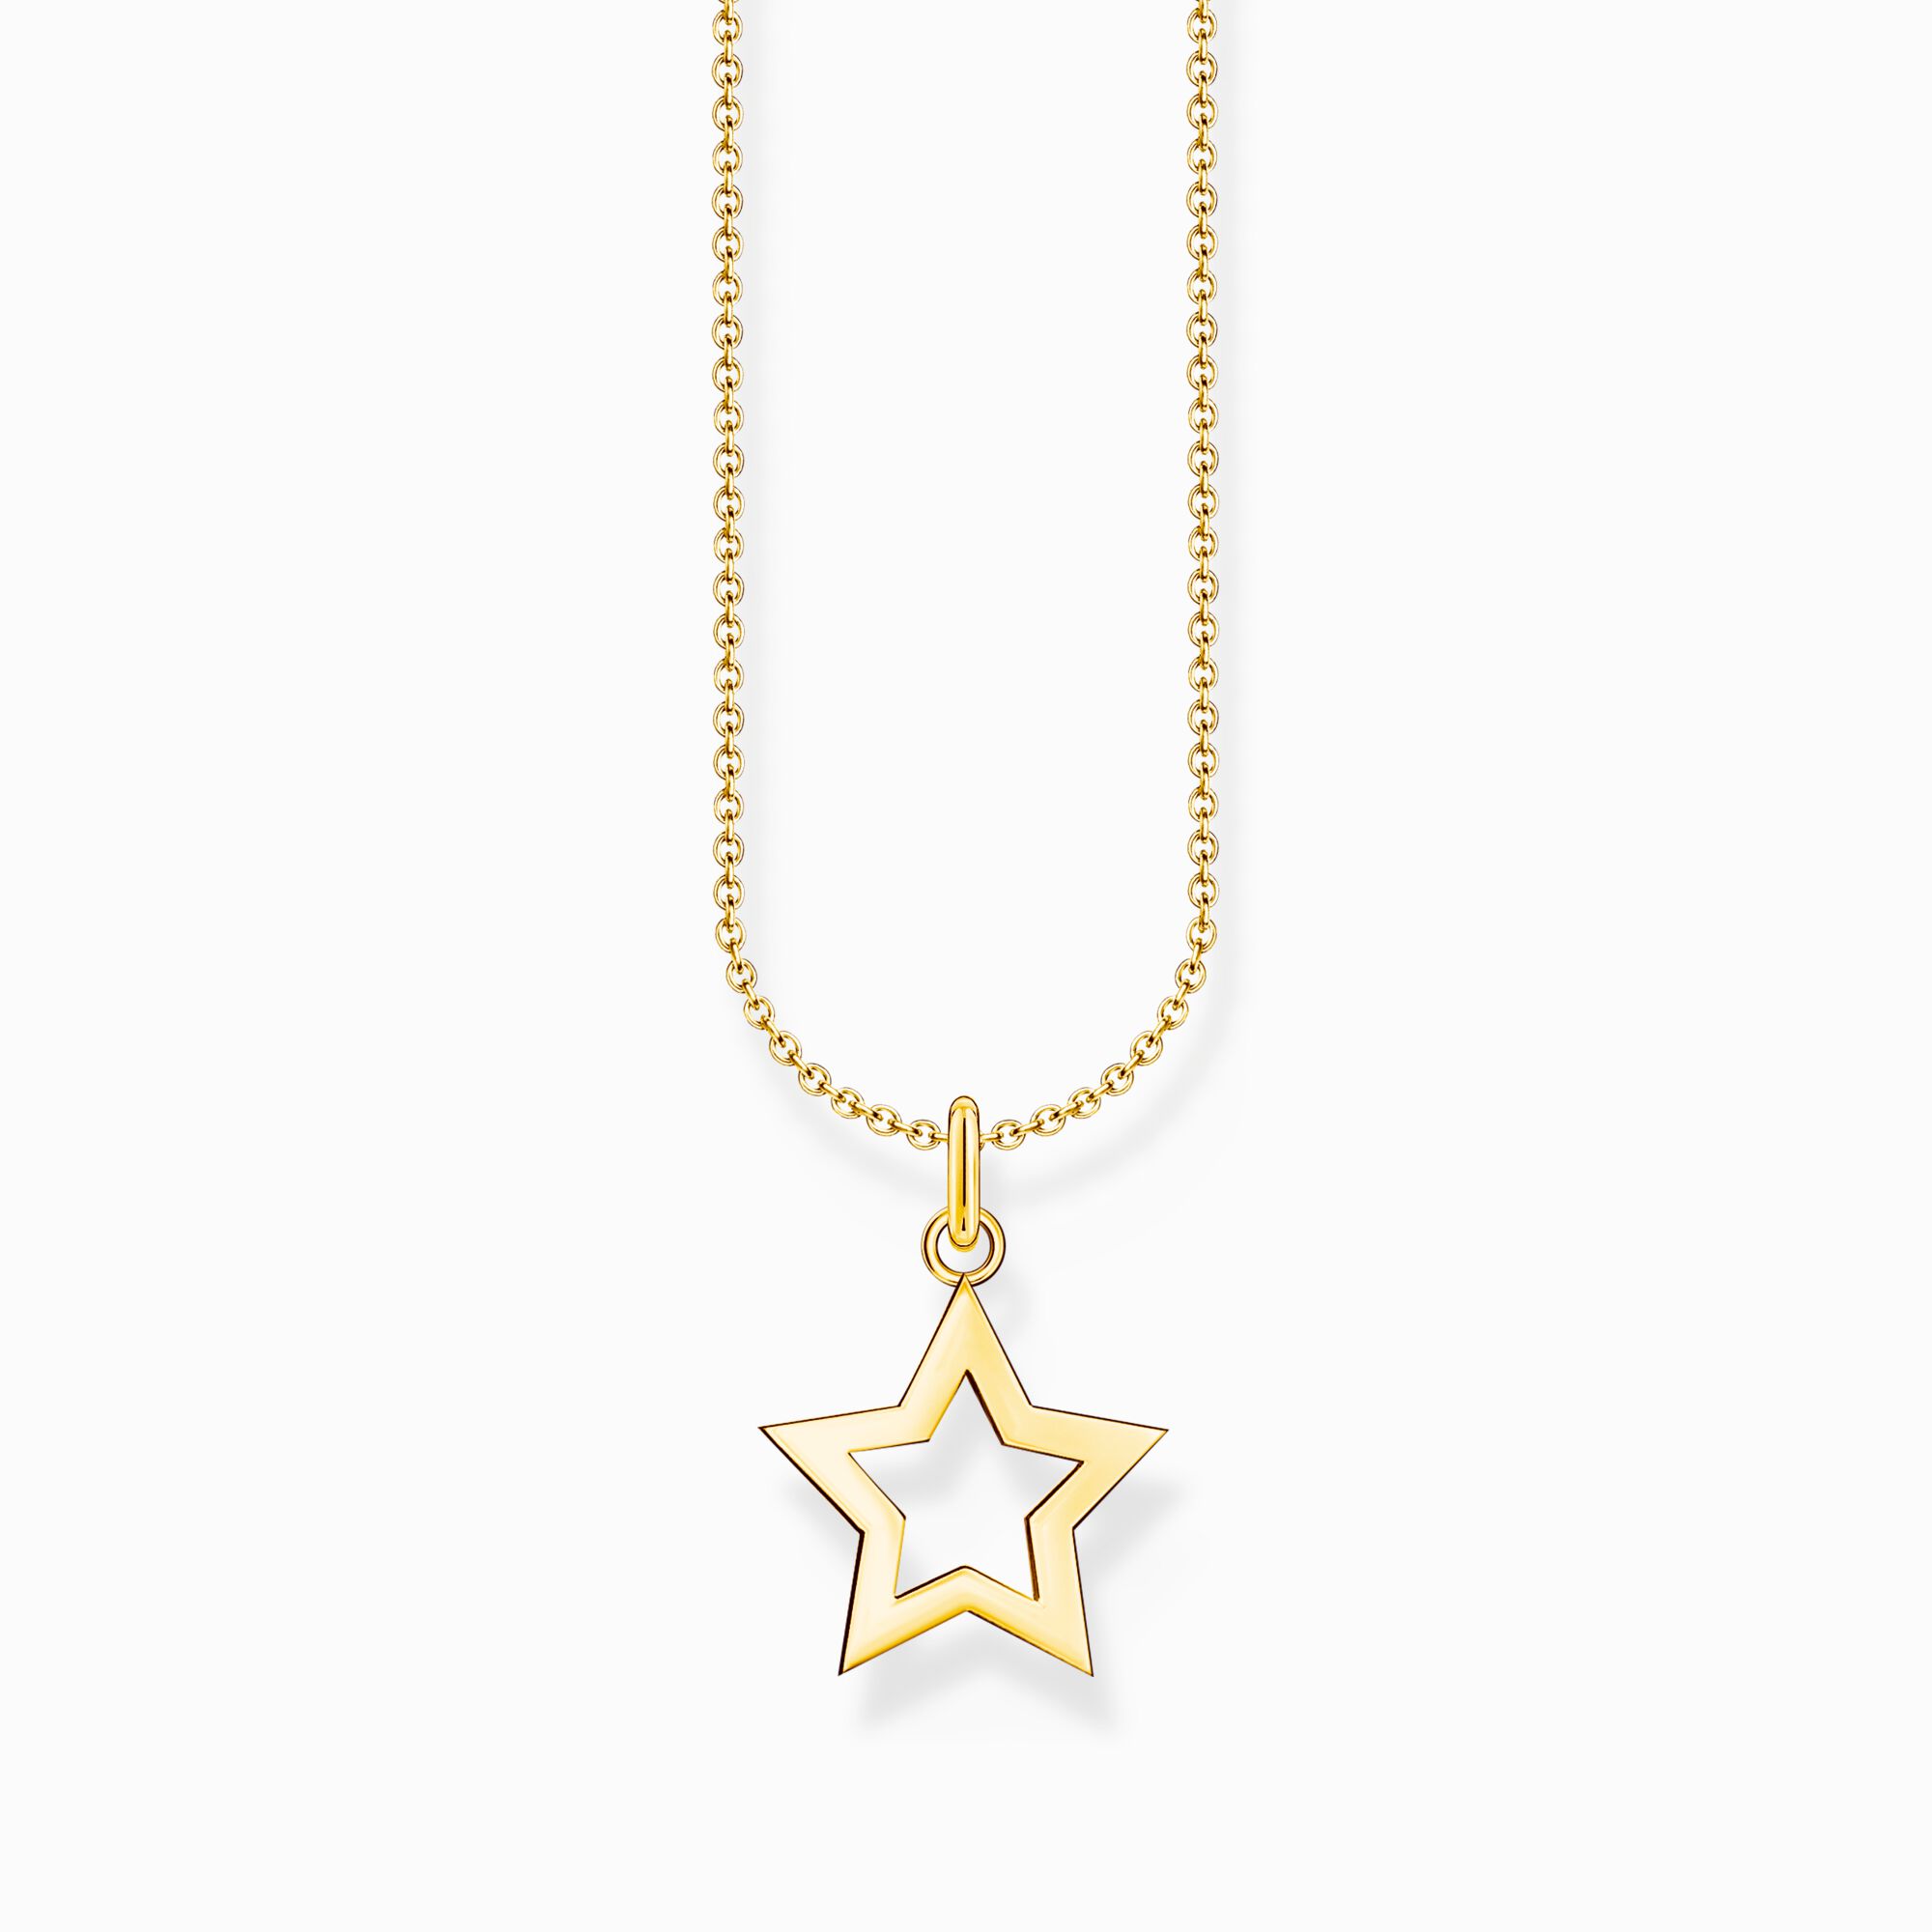 Gold-plated necklace with star pendant from the Charming Collection collection in the THOMAS SABO online store